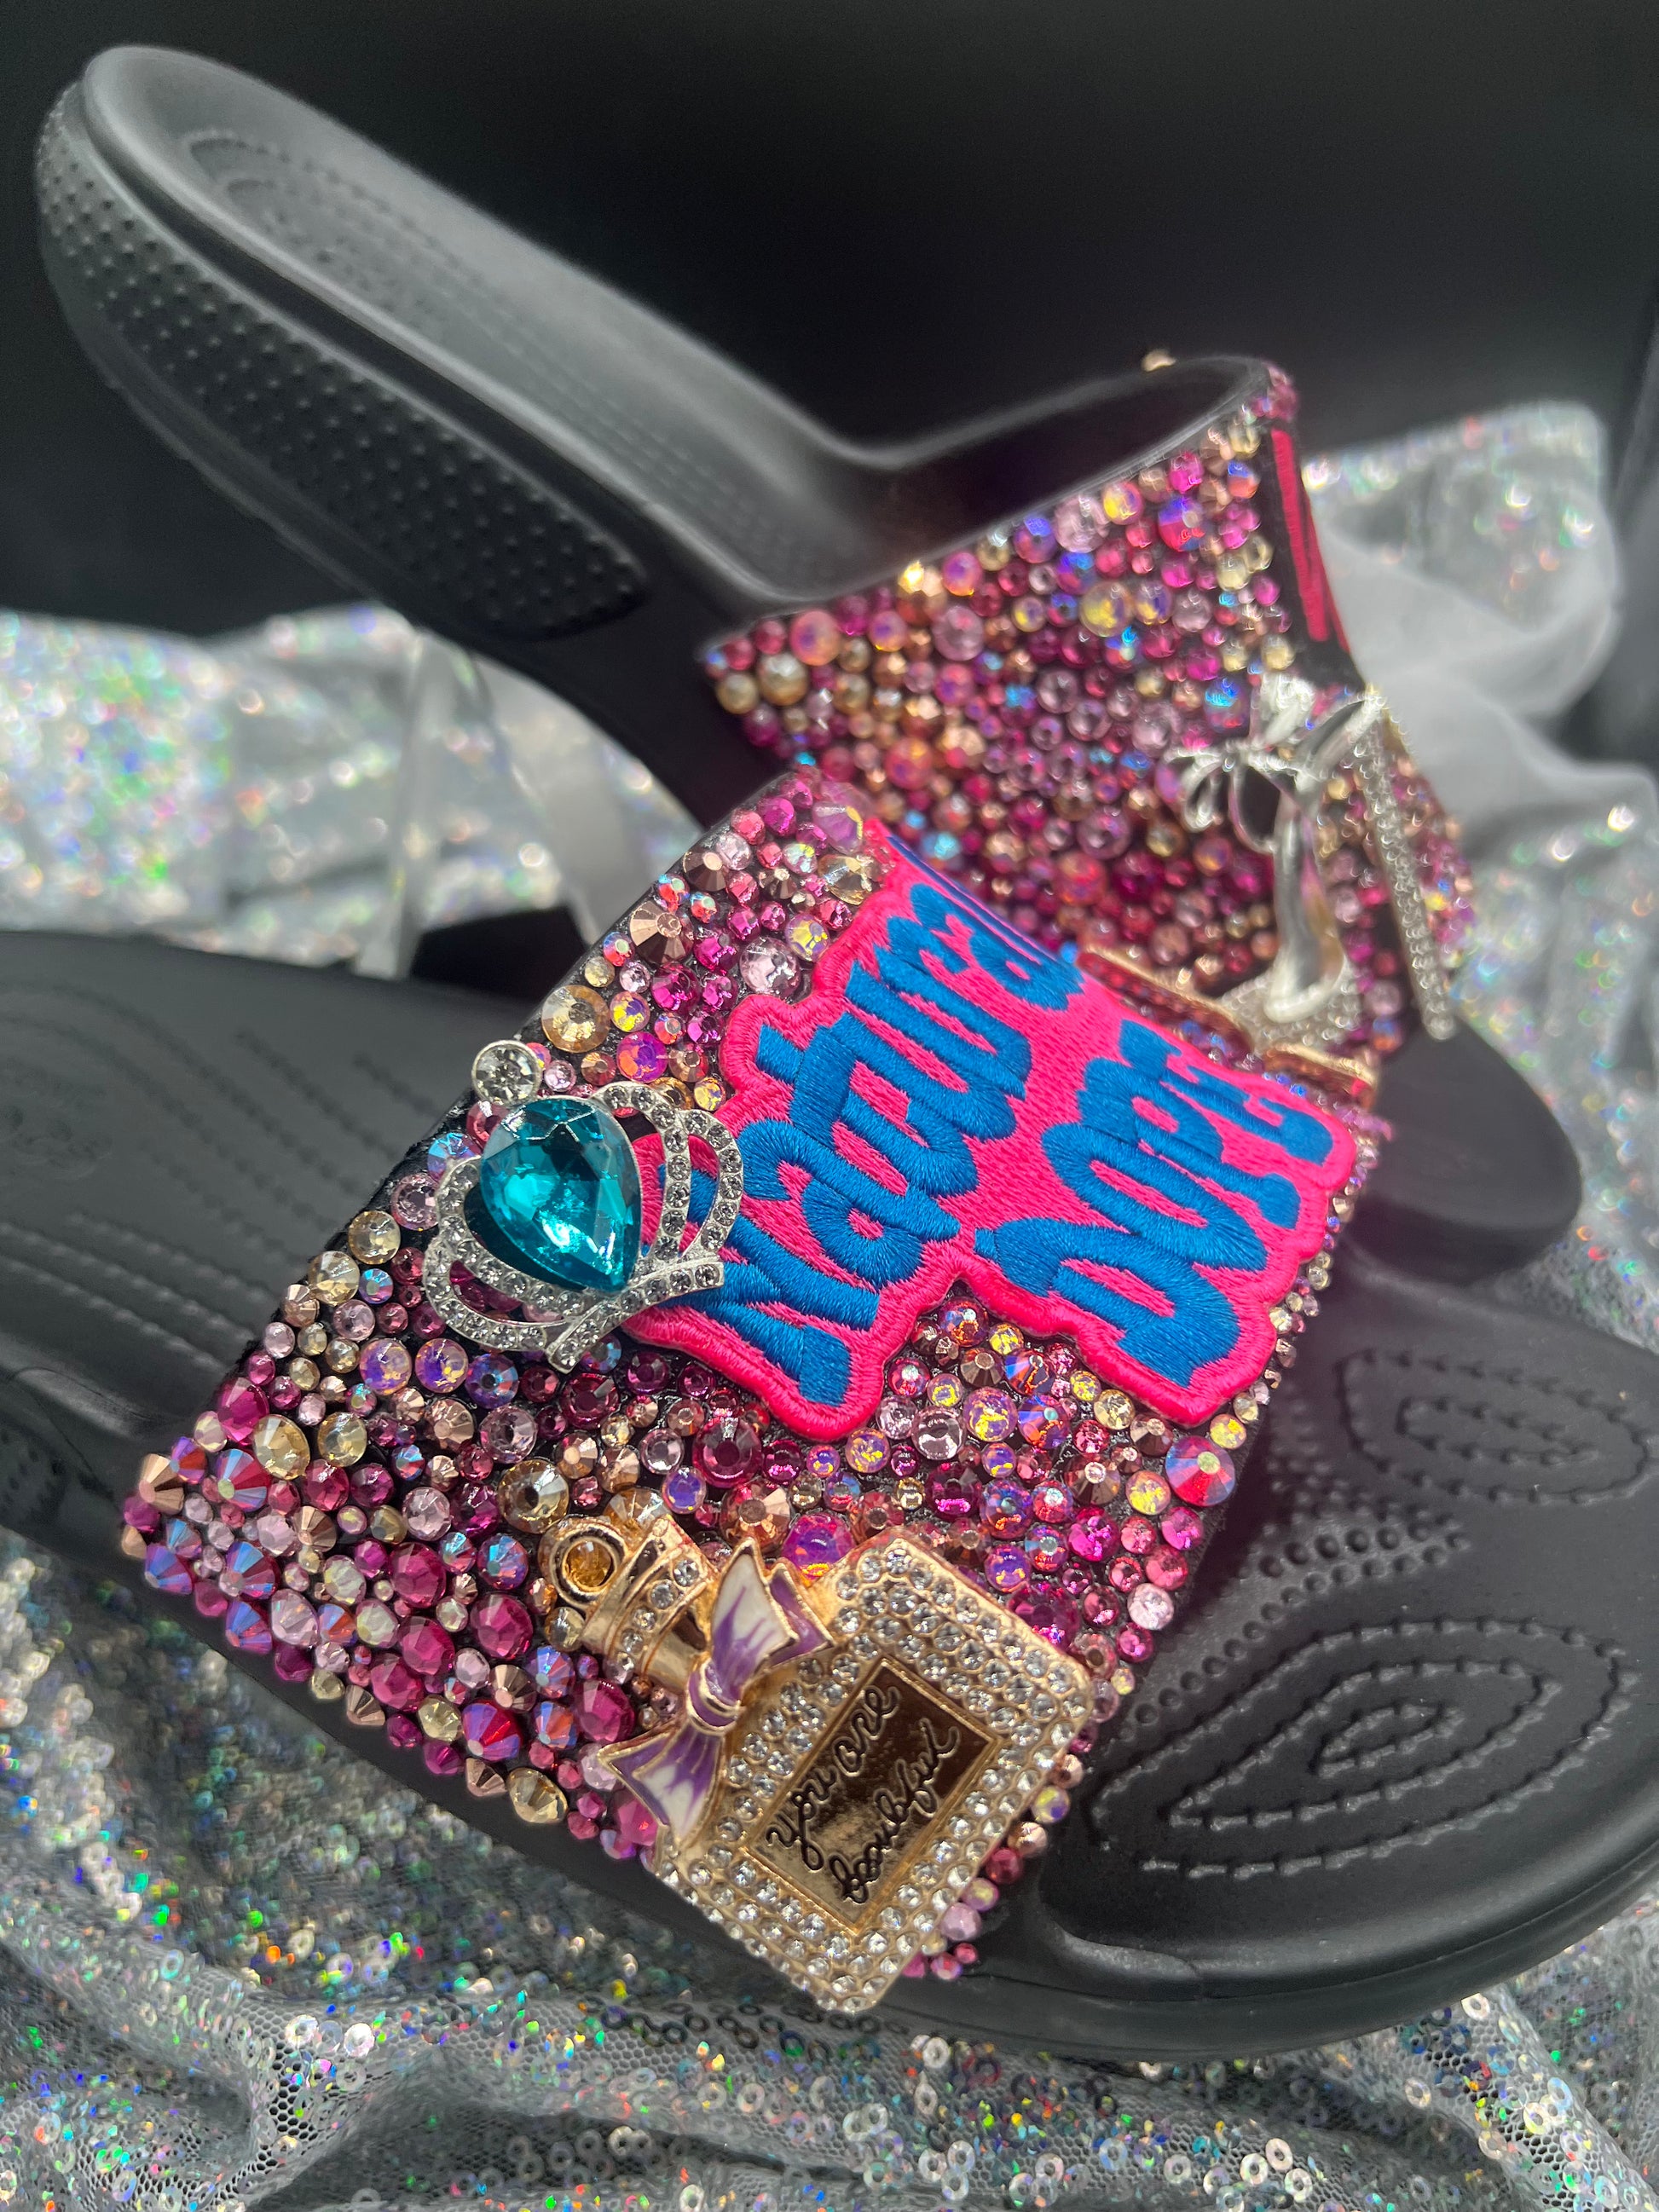 Added to my personal custom slides collection ✓😍😜 #Crocs #blingbling